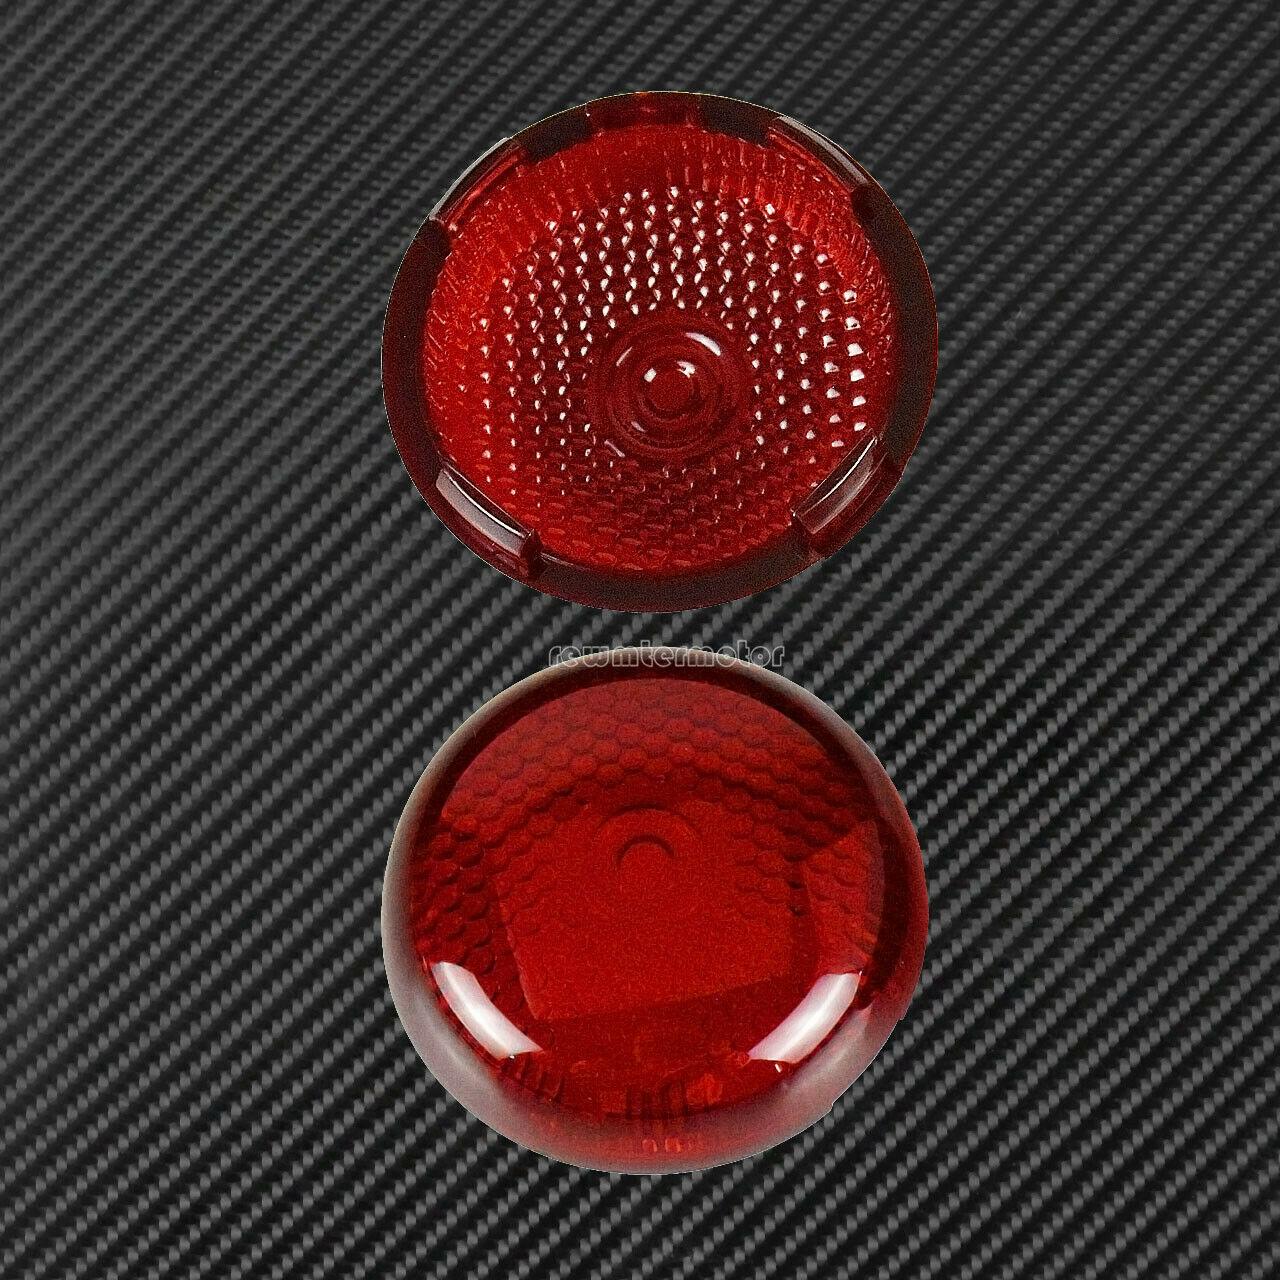 2x Red Bullet Turn Signals Light Lens Cover Fit For Harley Dyna Softail Touring - Moto Life Products